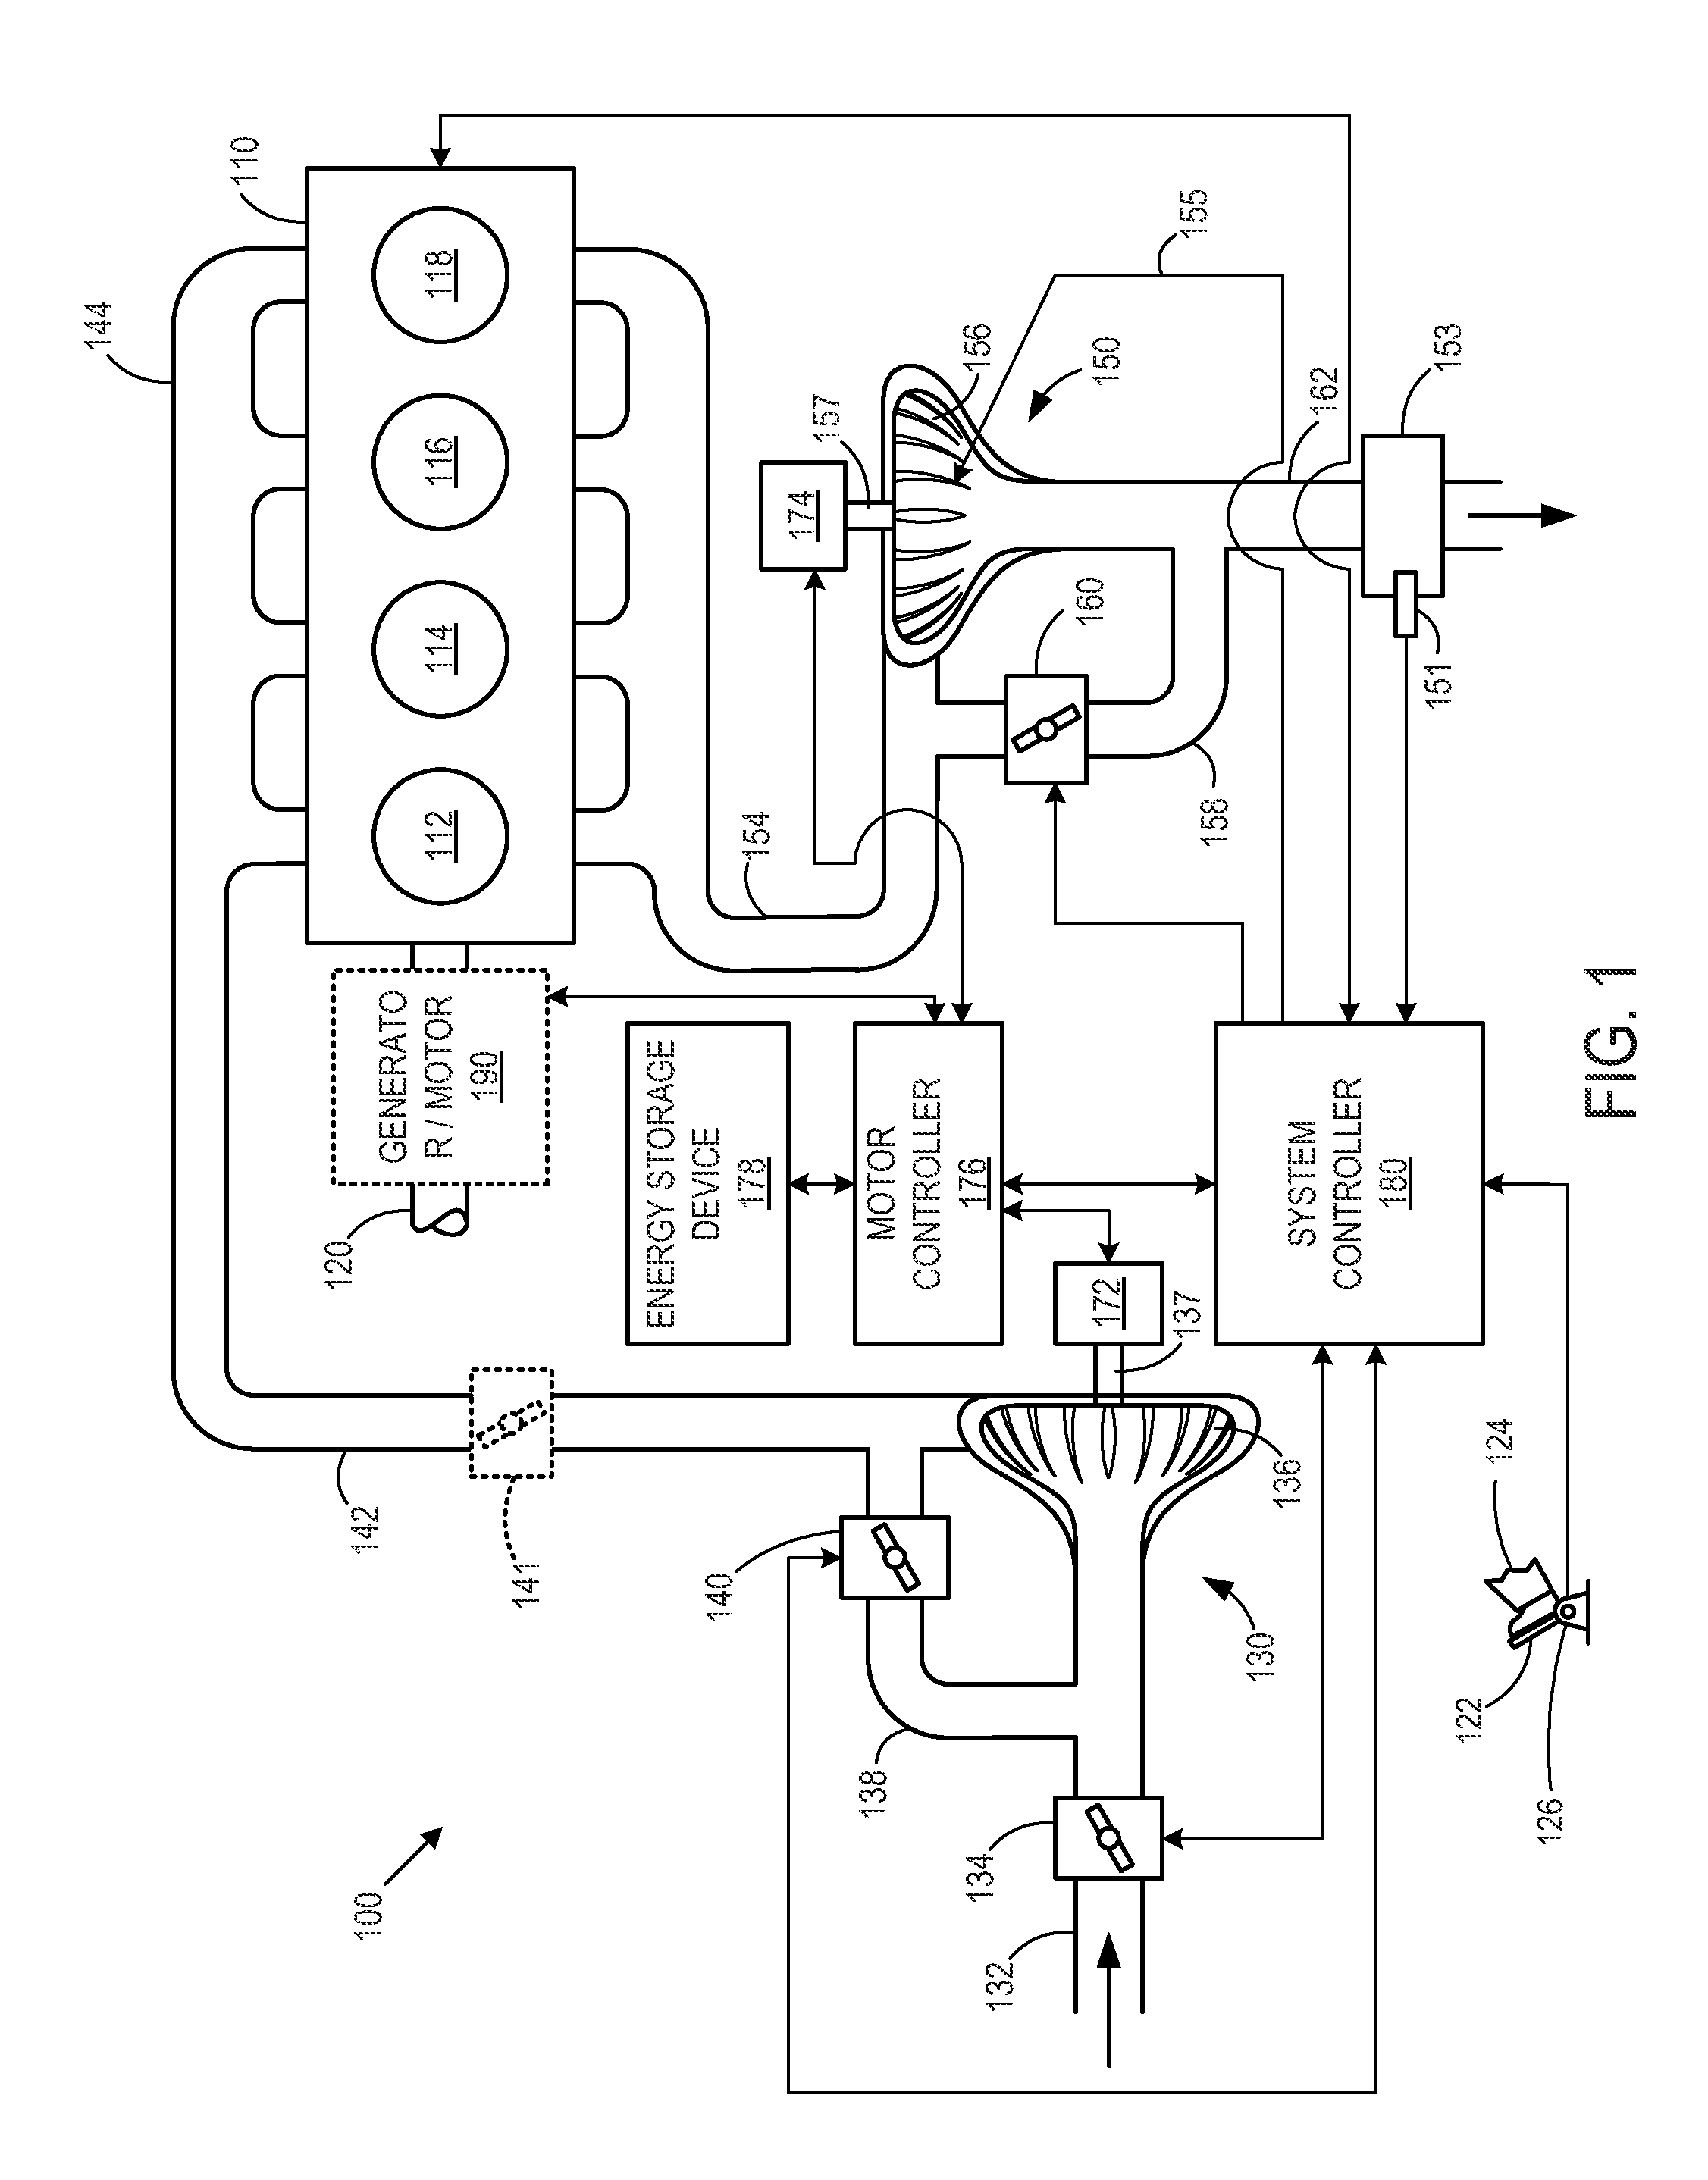 Compression system for internal combustion engine including a rotationally uncoupled exhaust gas turbine